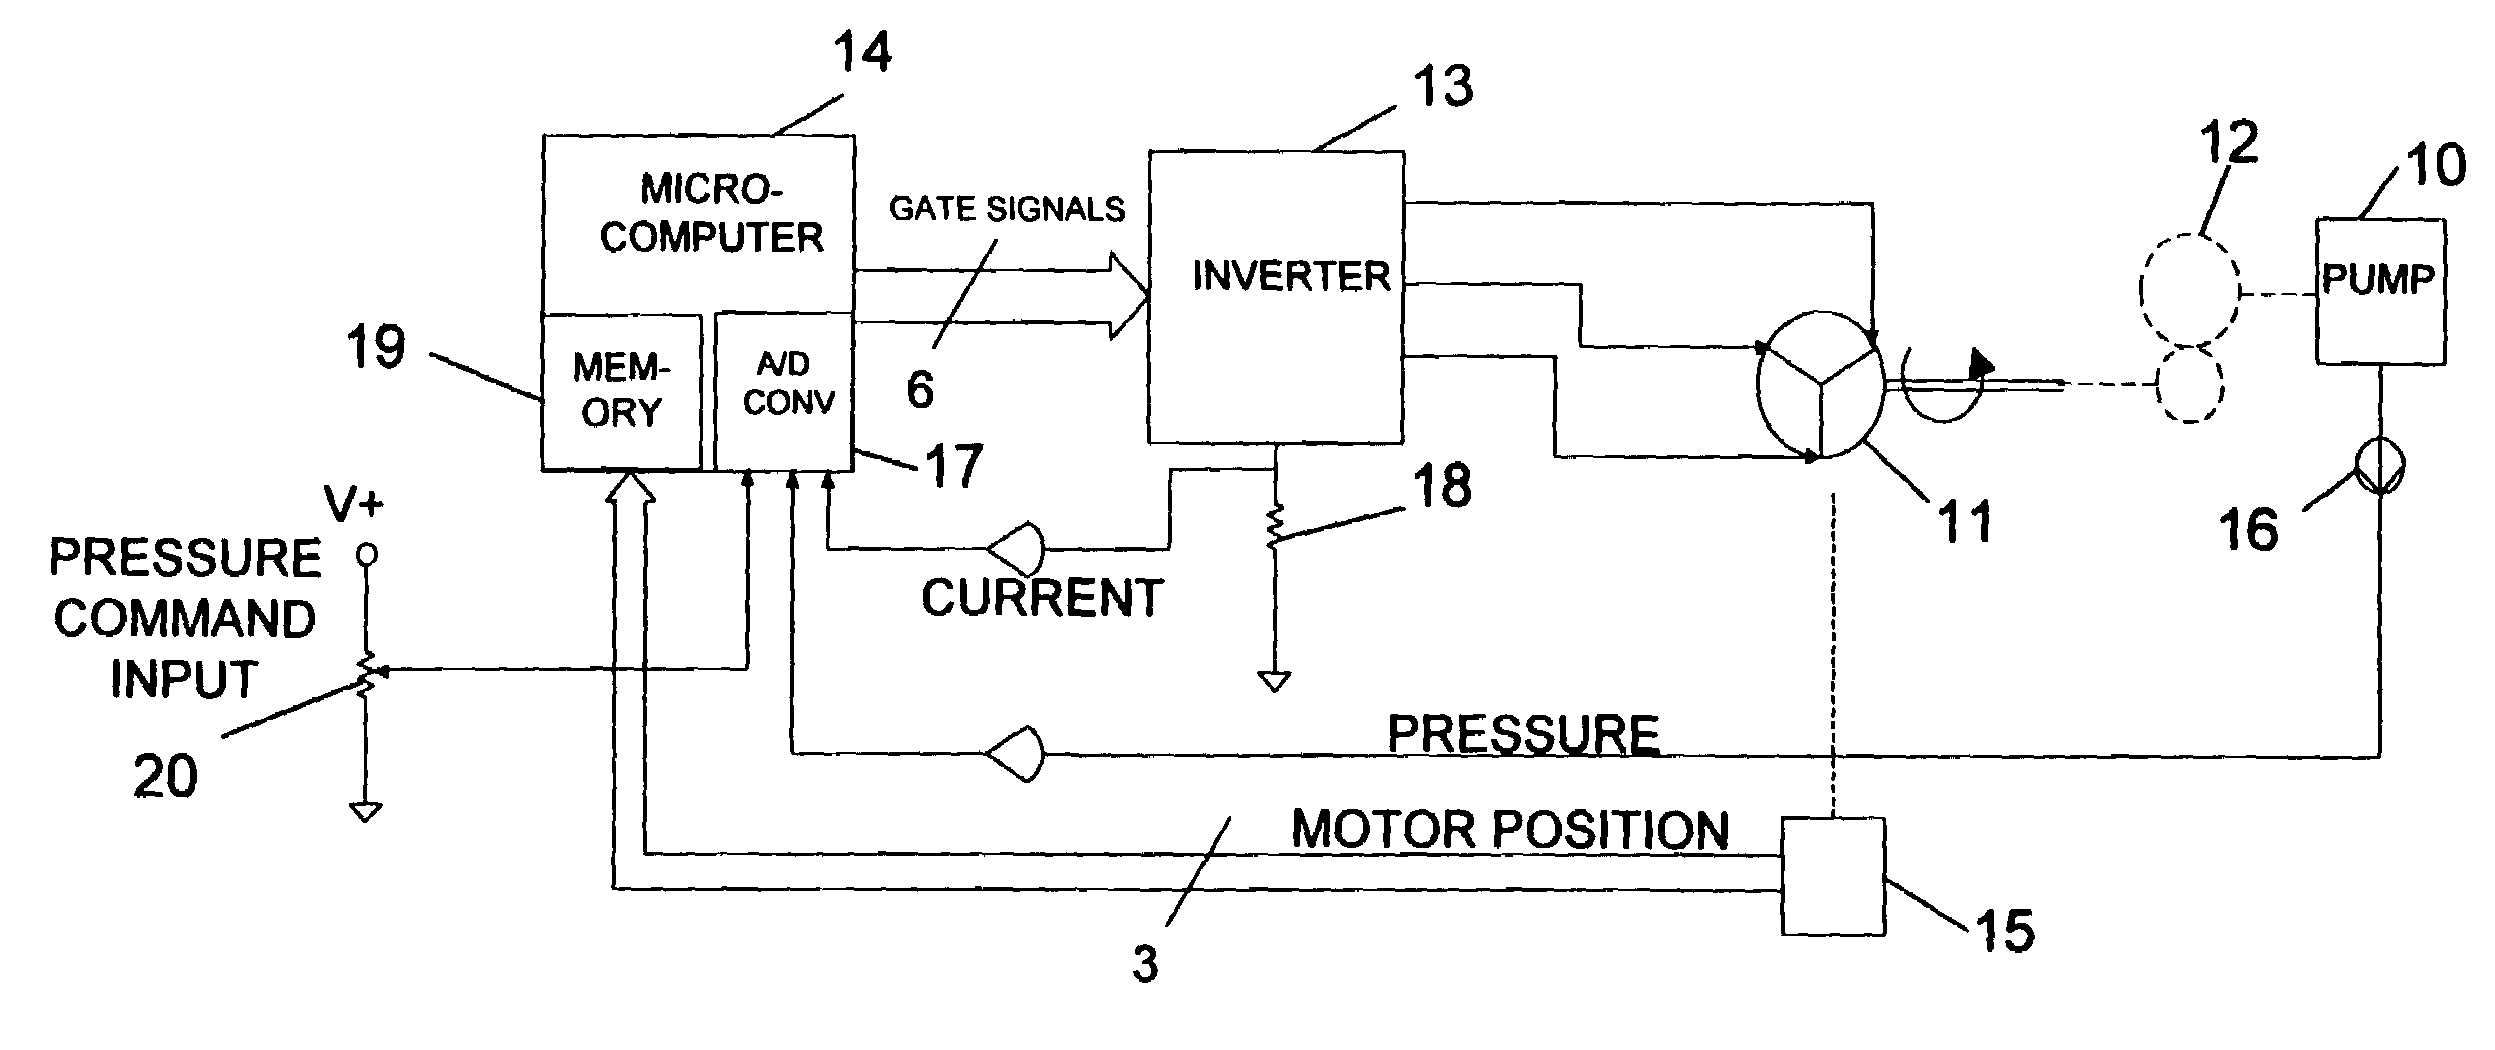 Method for controlling the motor of a pump involving the determination and synchronization of the point of maximum torque with a table of values used to efficiently drive the motor